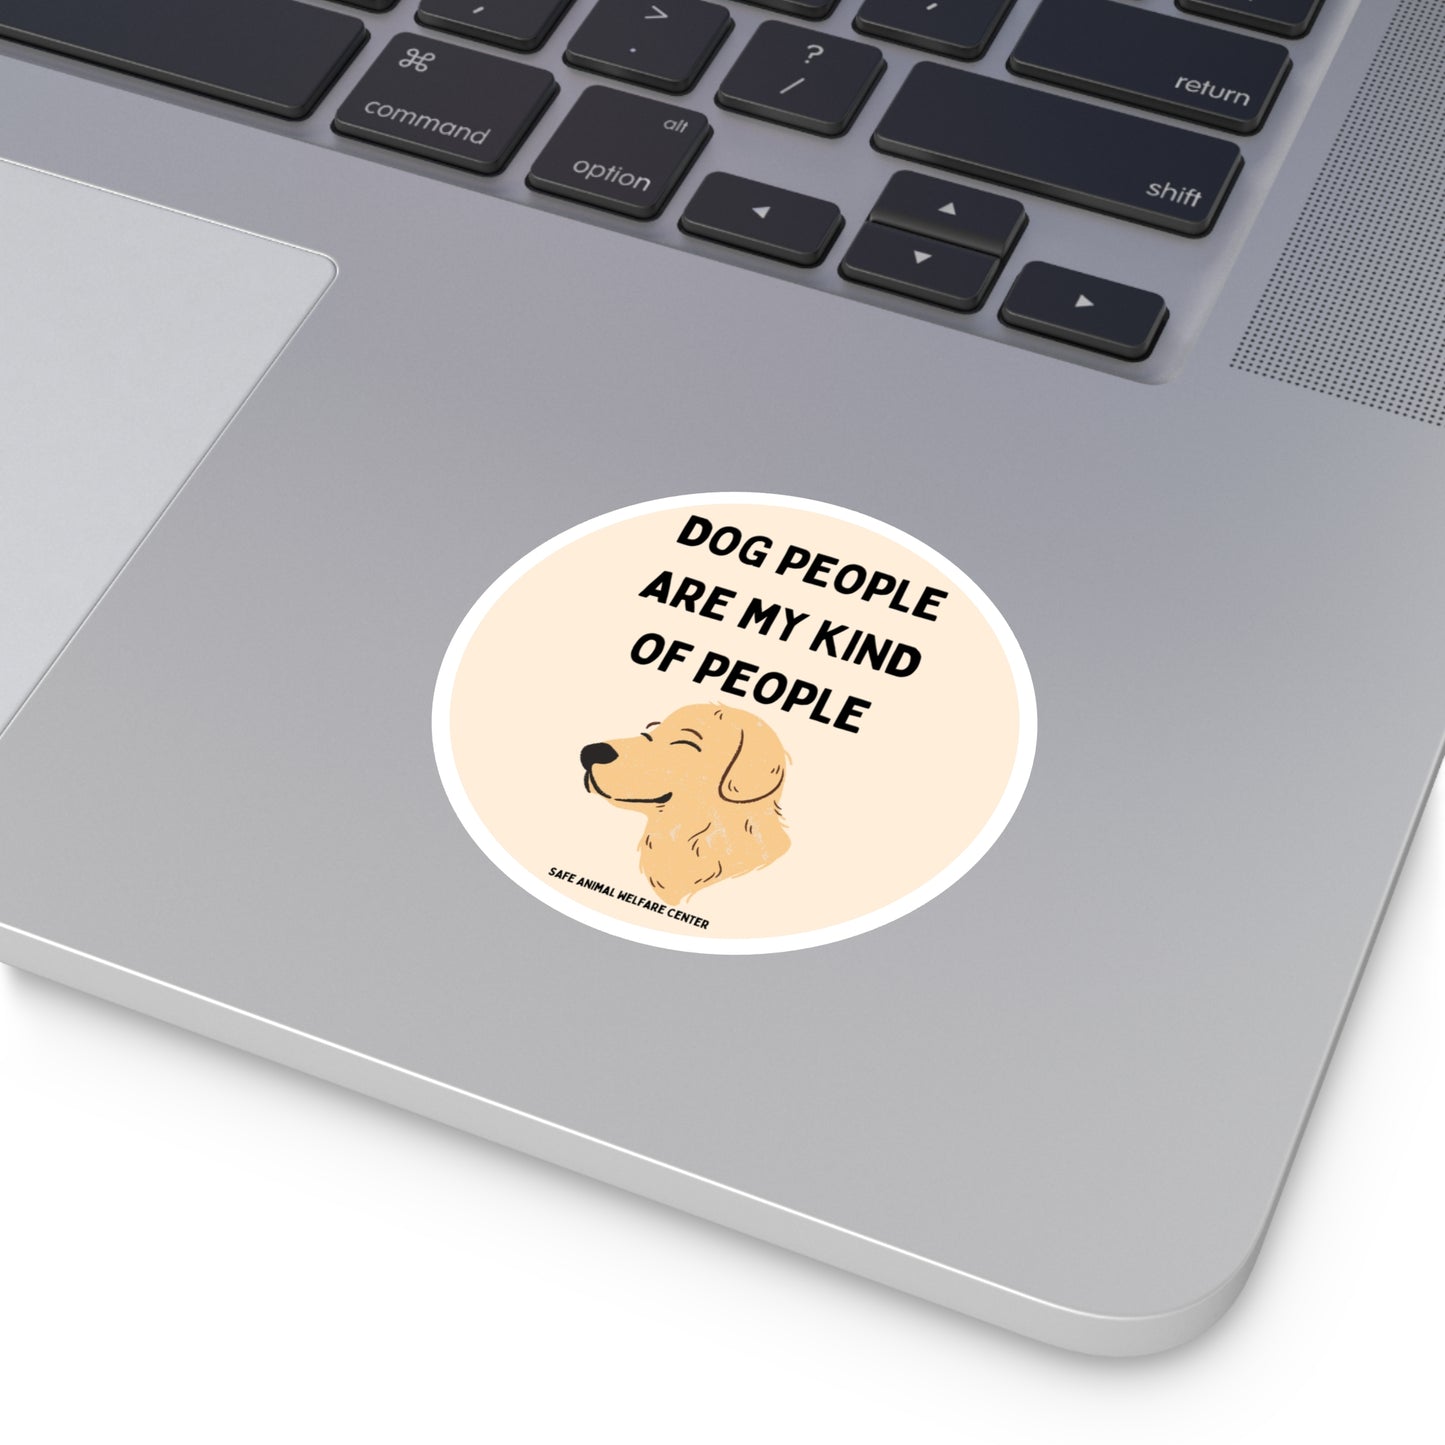 Do You Have A Dog? Round Stickers, Indoor\Outdoor